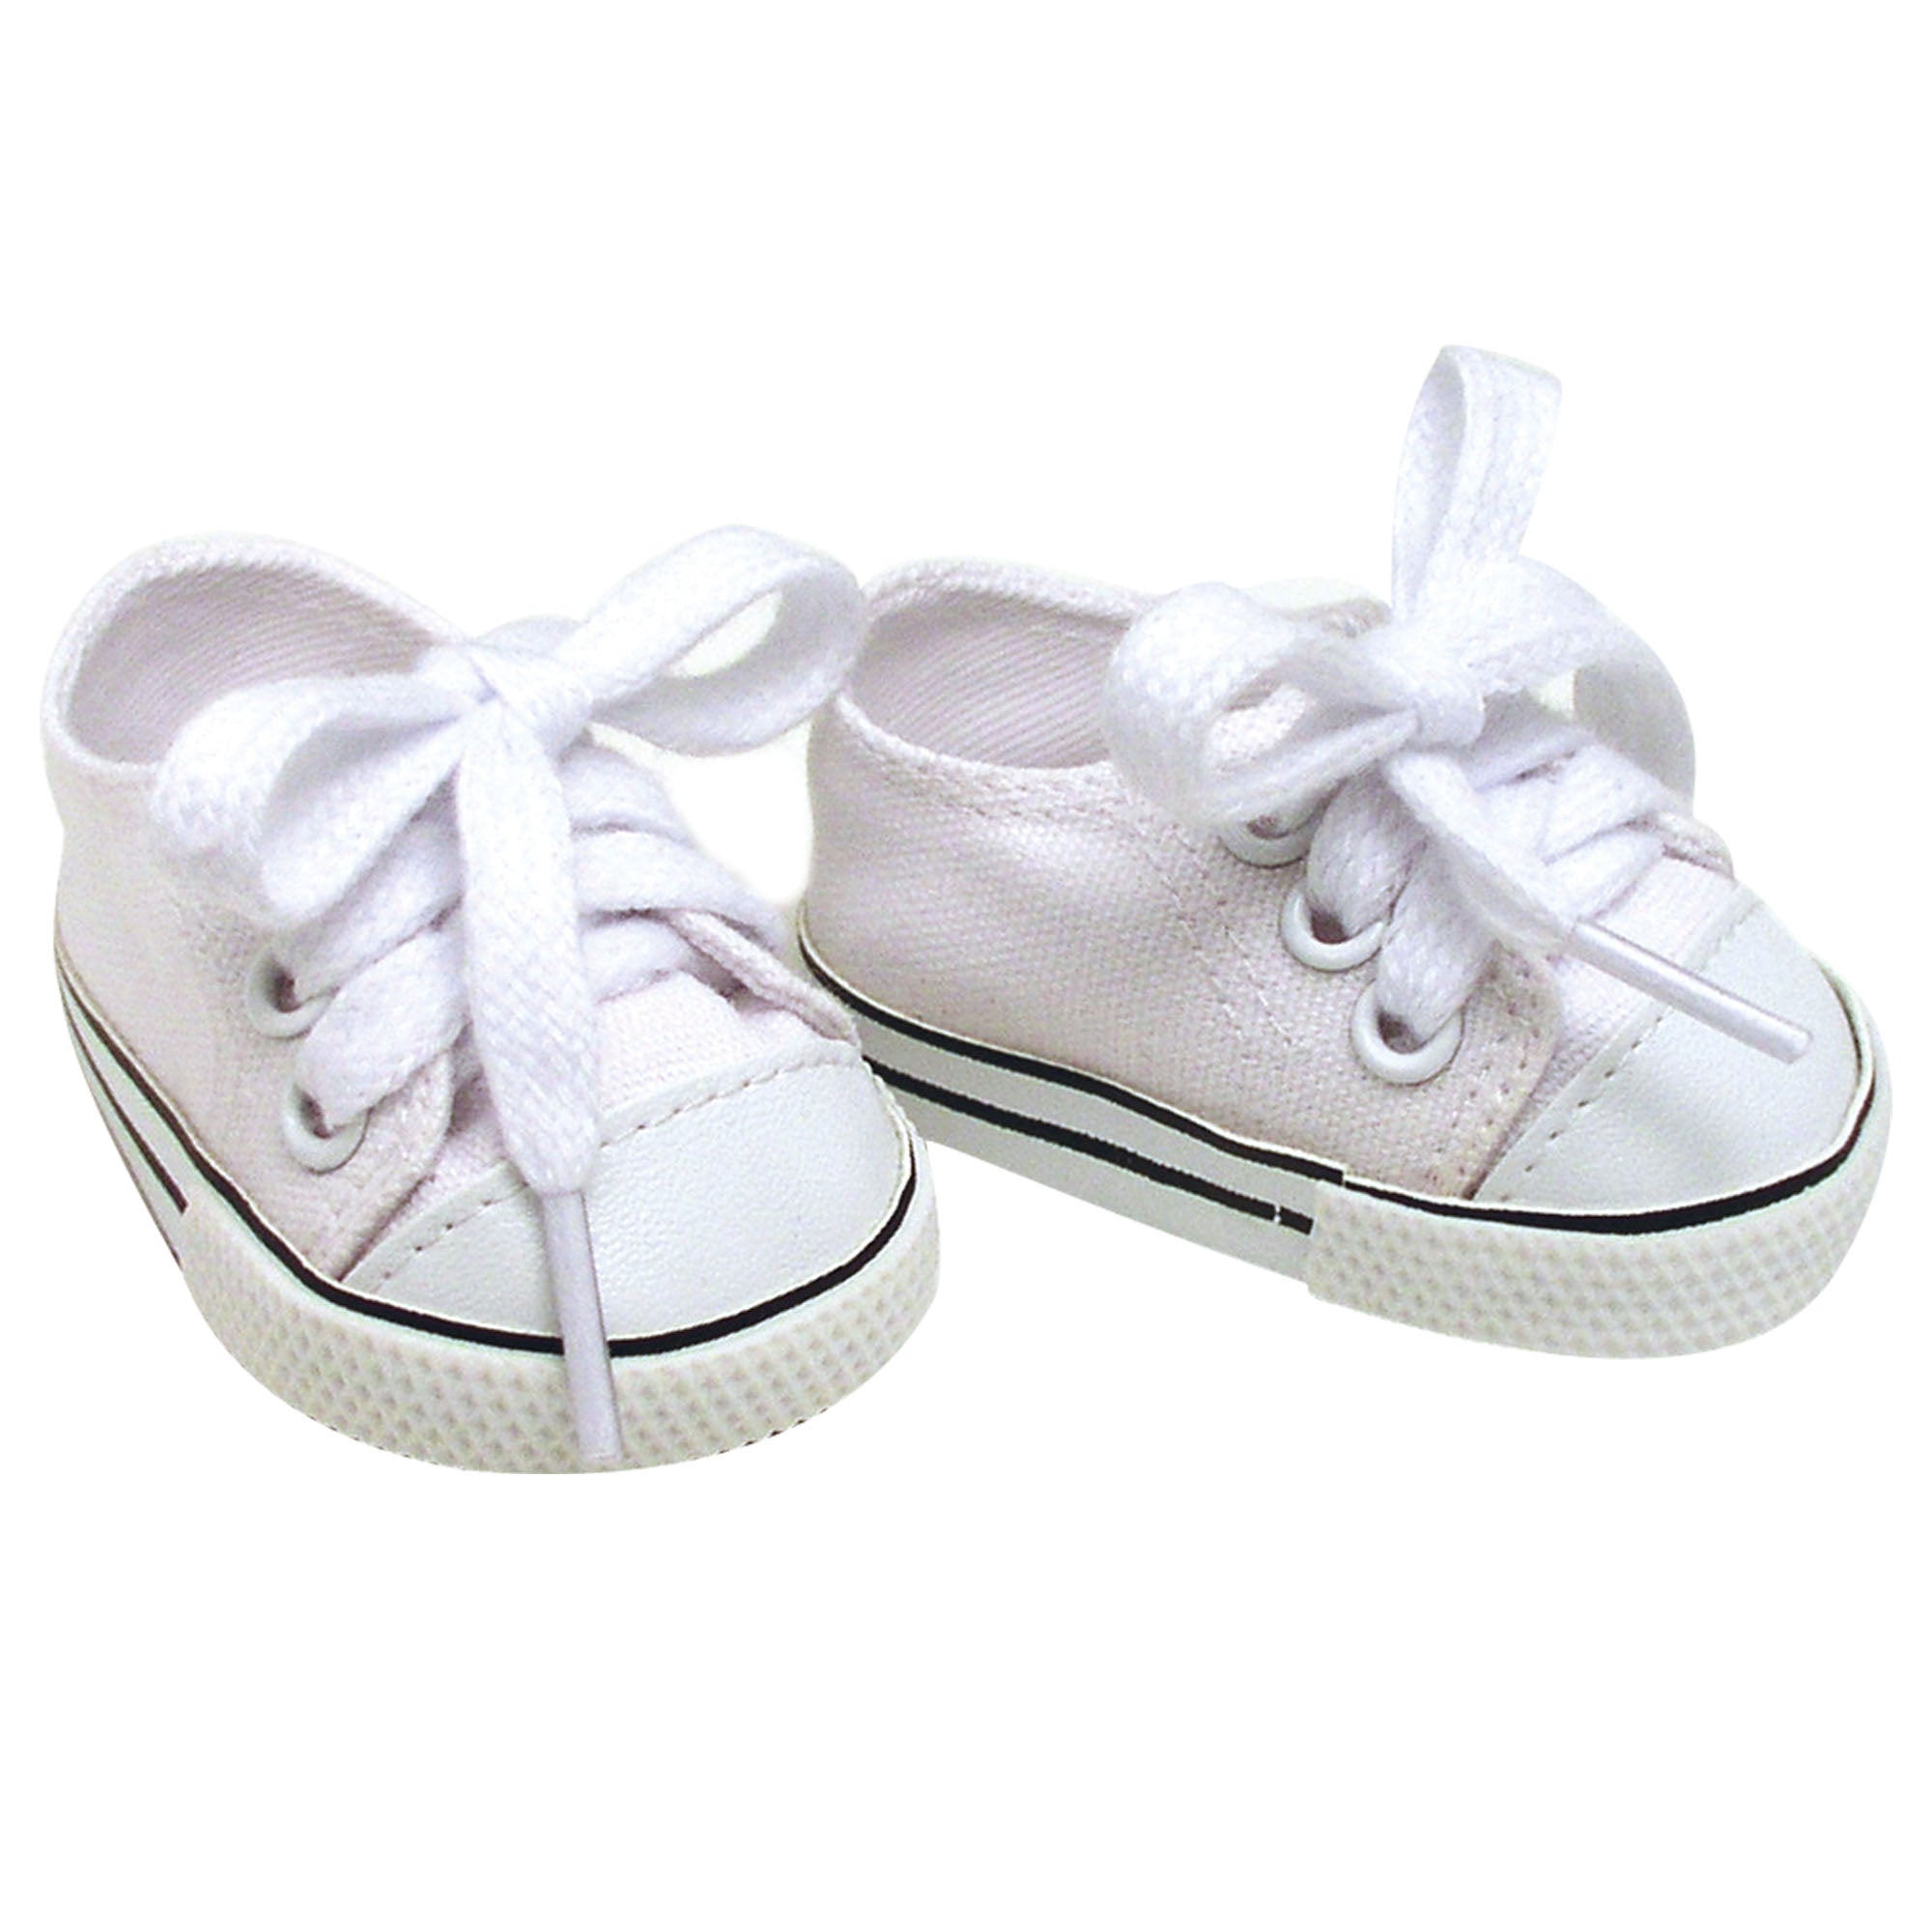 Sophia’s White Canvas Sneaker Shoes with Laces for 18" Dolls